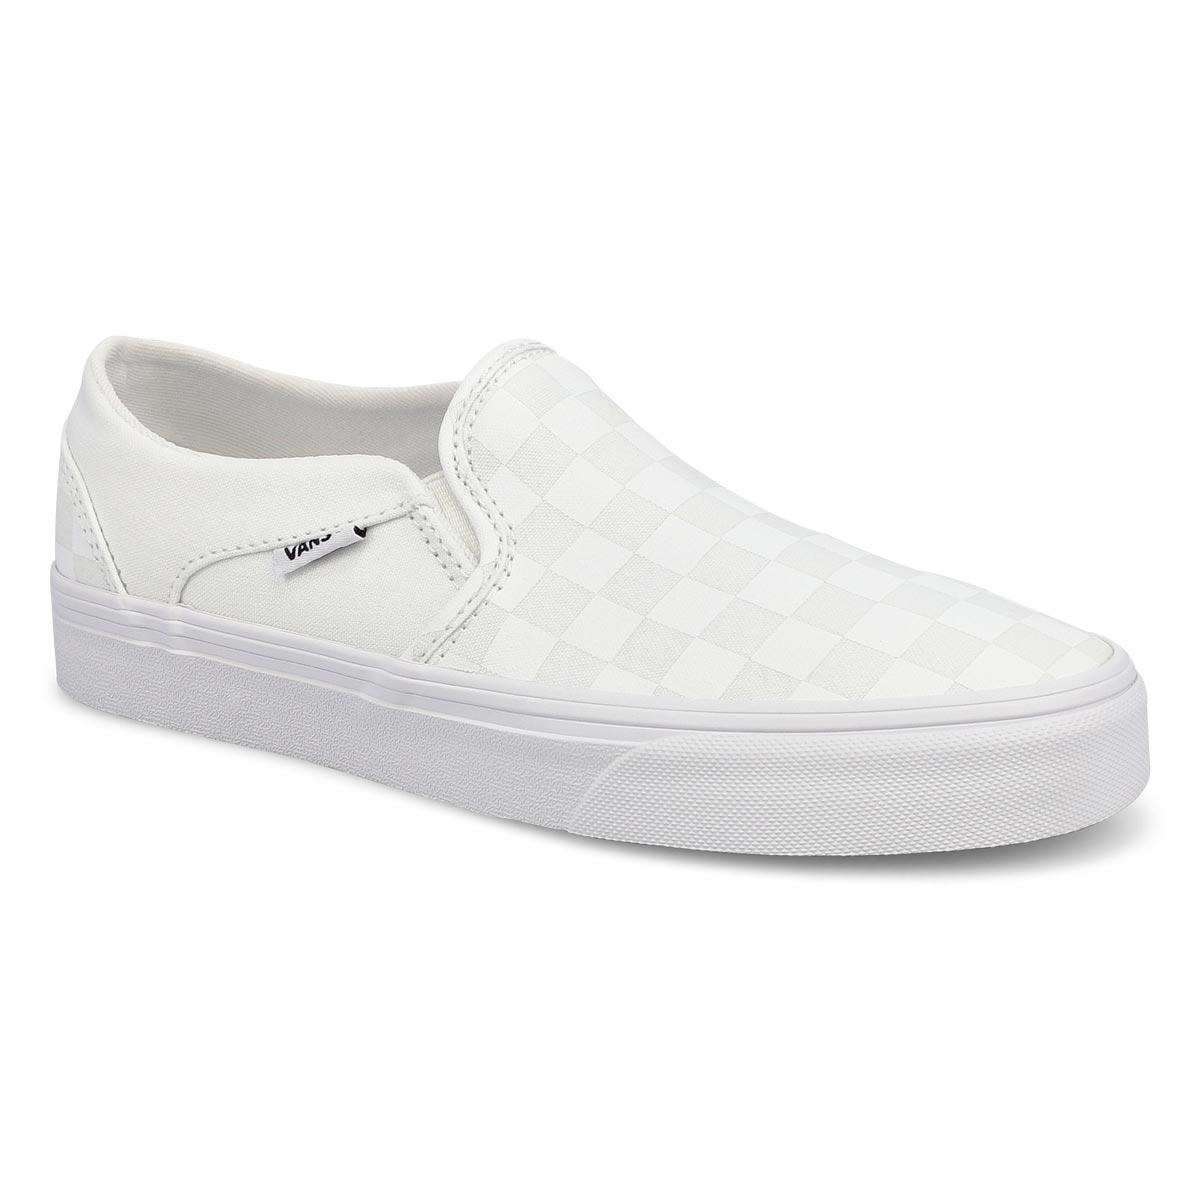 white vans shoes for sale